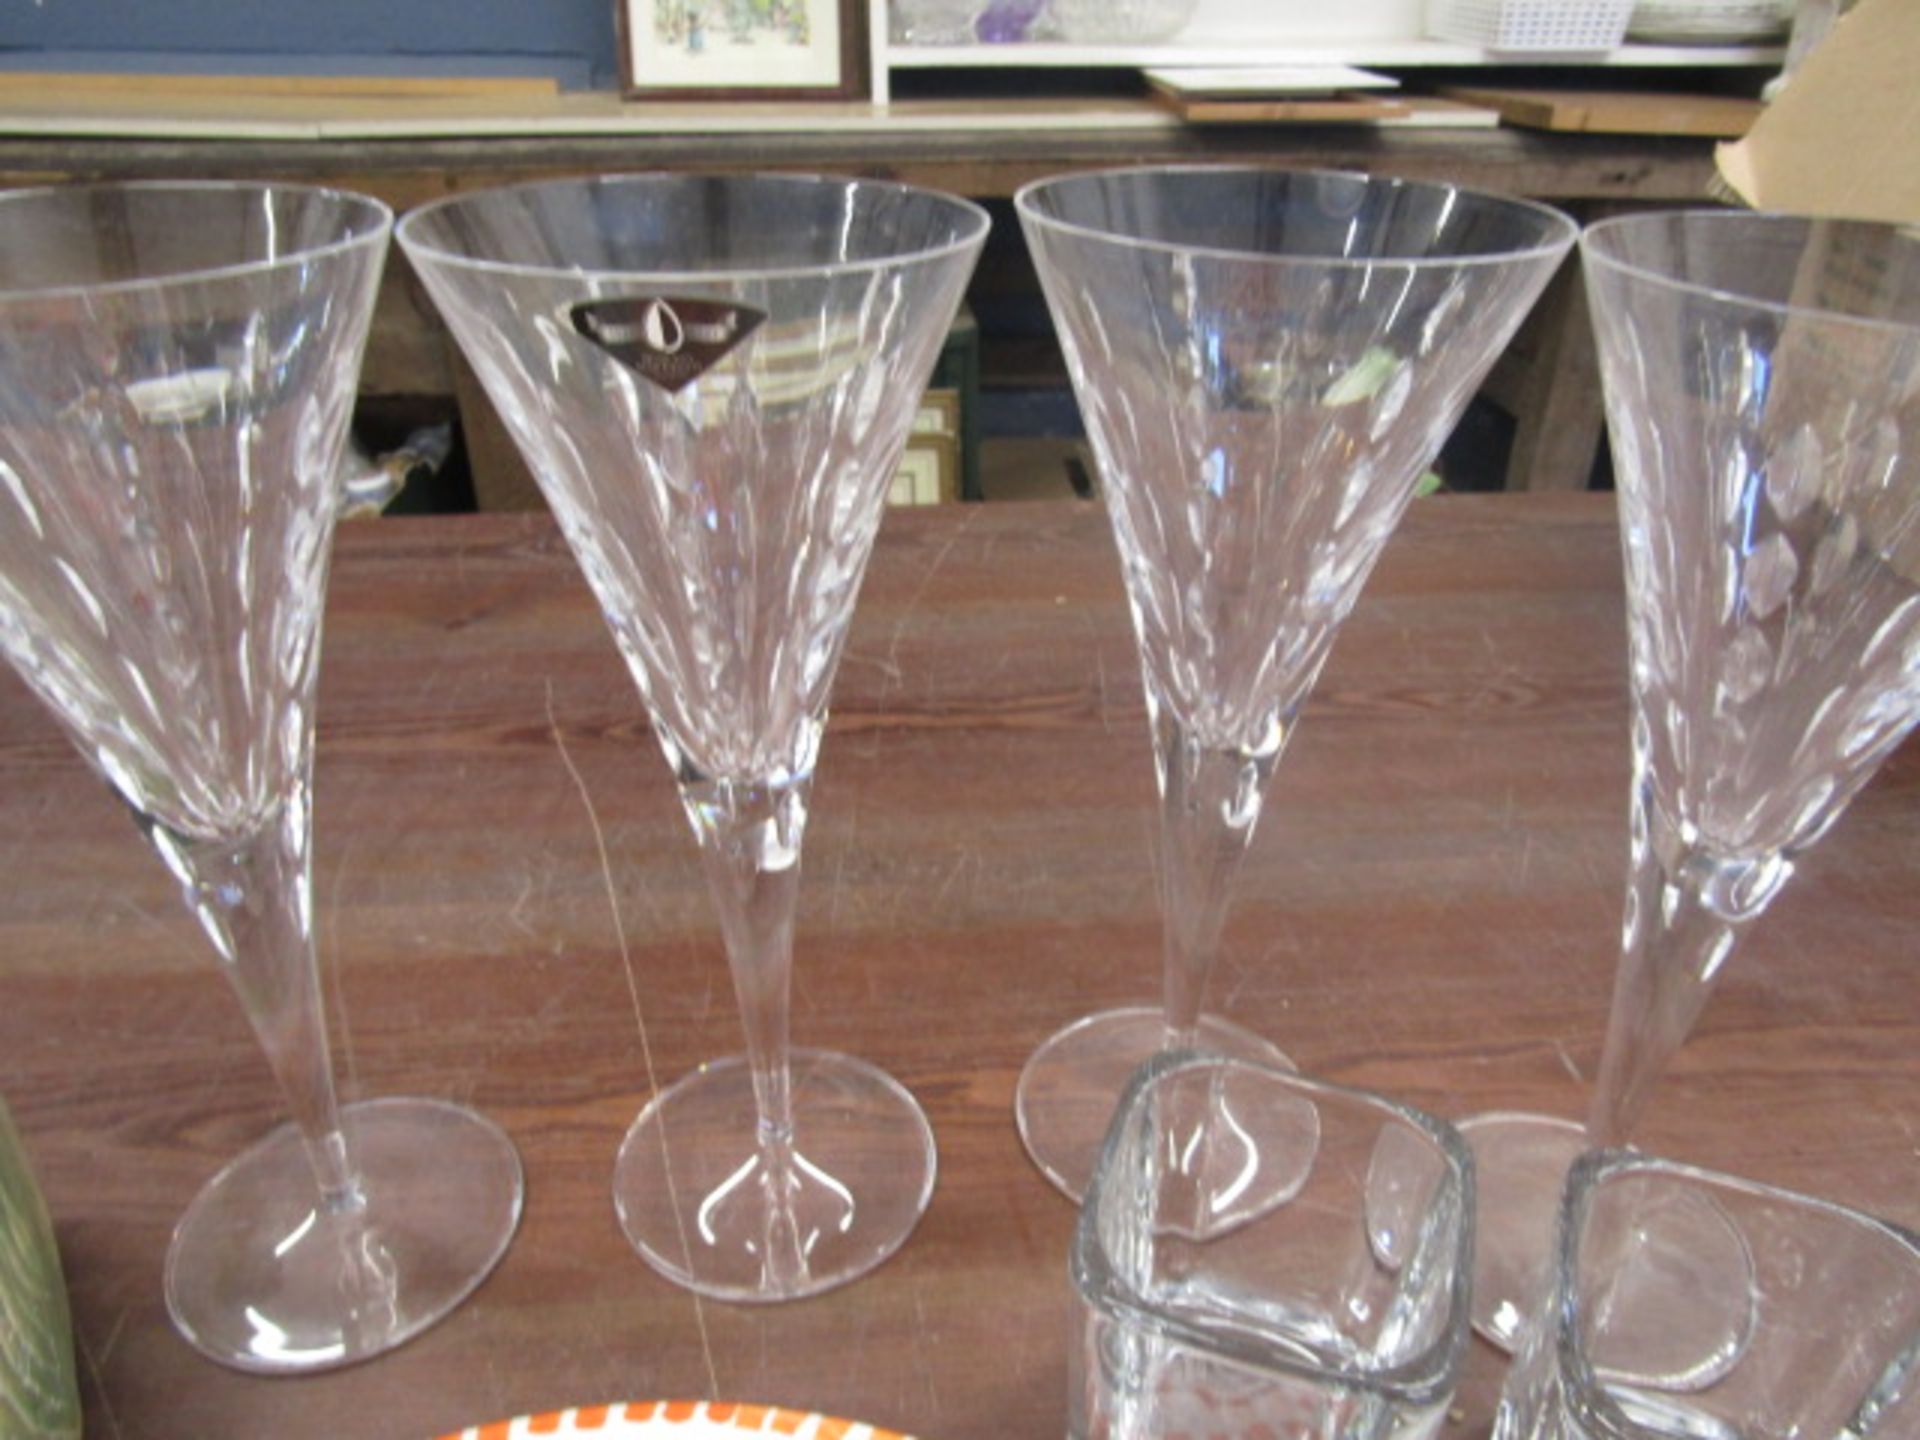 China and glass/ lead crystal glasses - Image 2 of 9